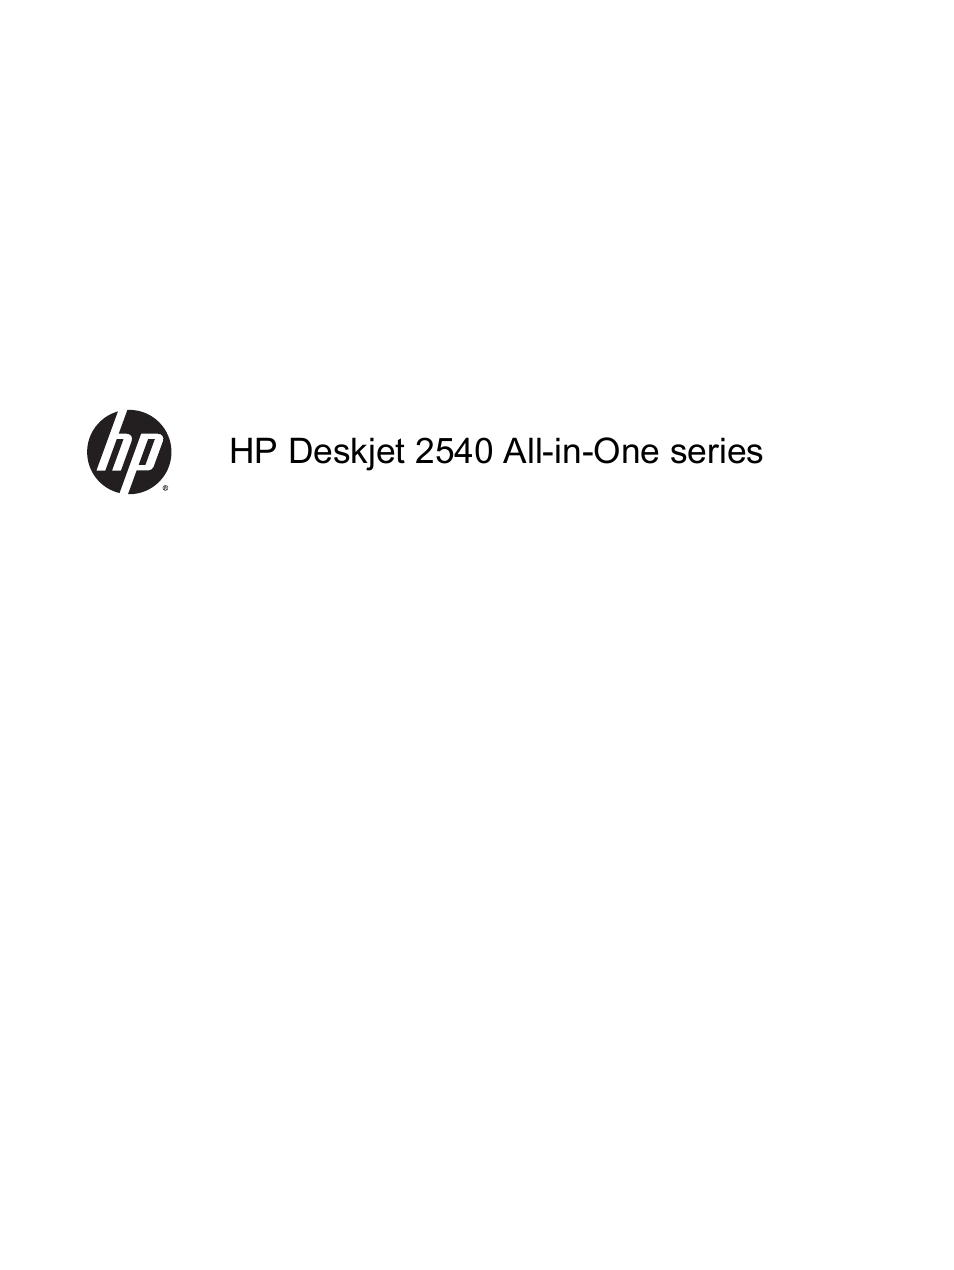 HP Deskjet 2540 All-in-One Printer User Manual | 102 pages